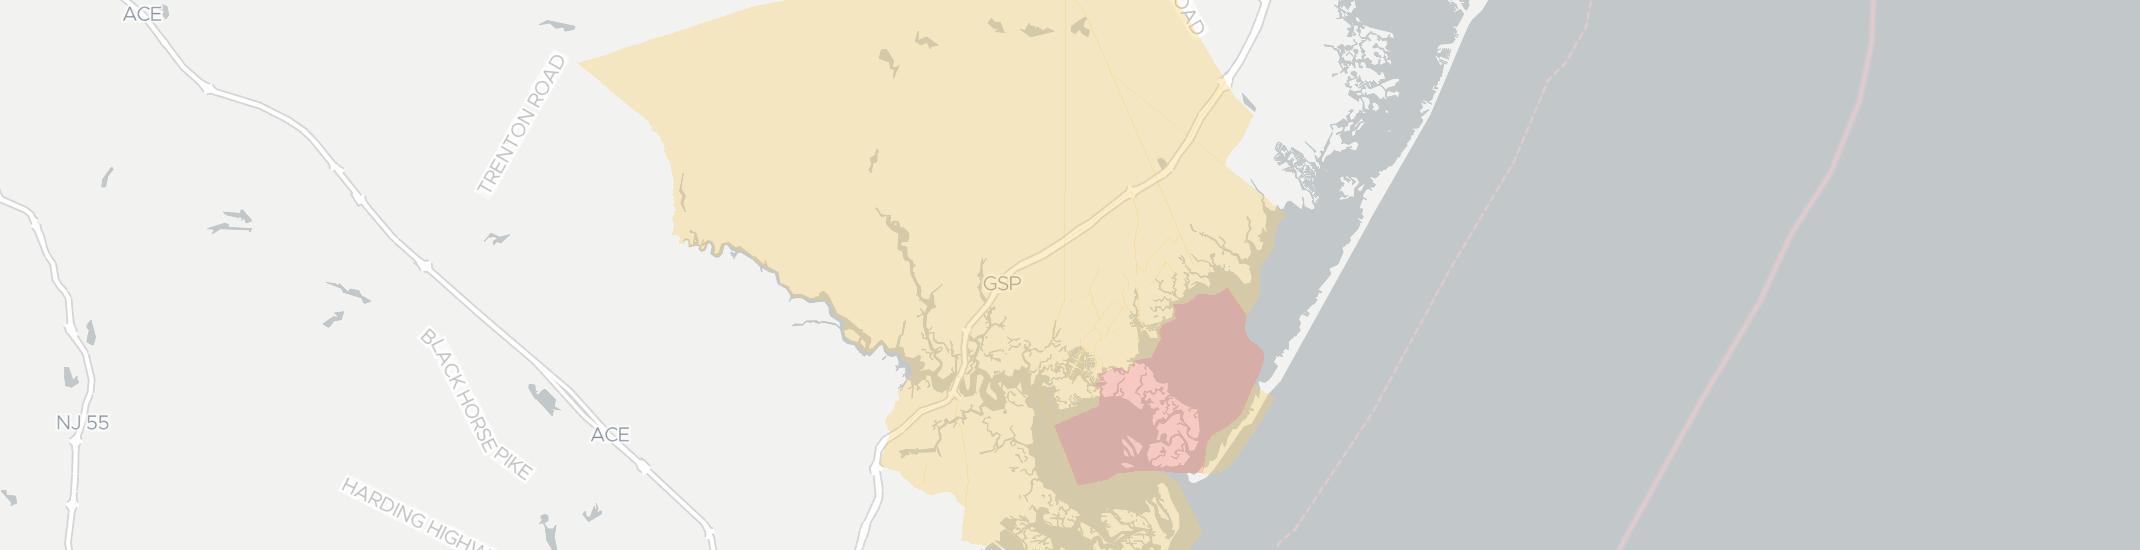 Tuckerton Internet Competition Map. Click for interactive map